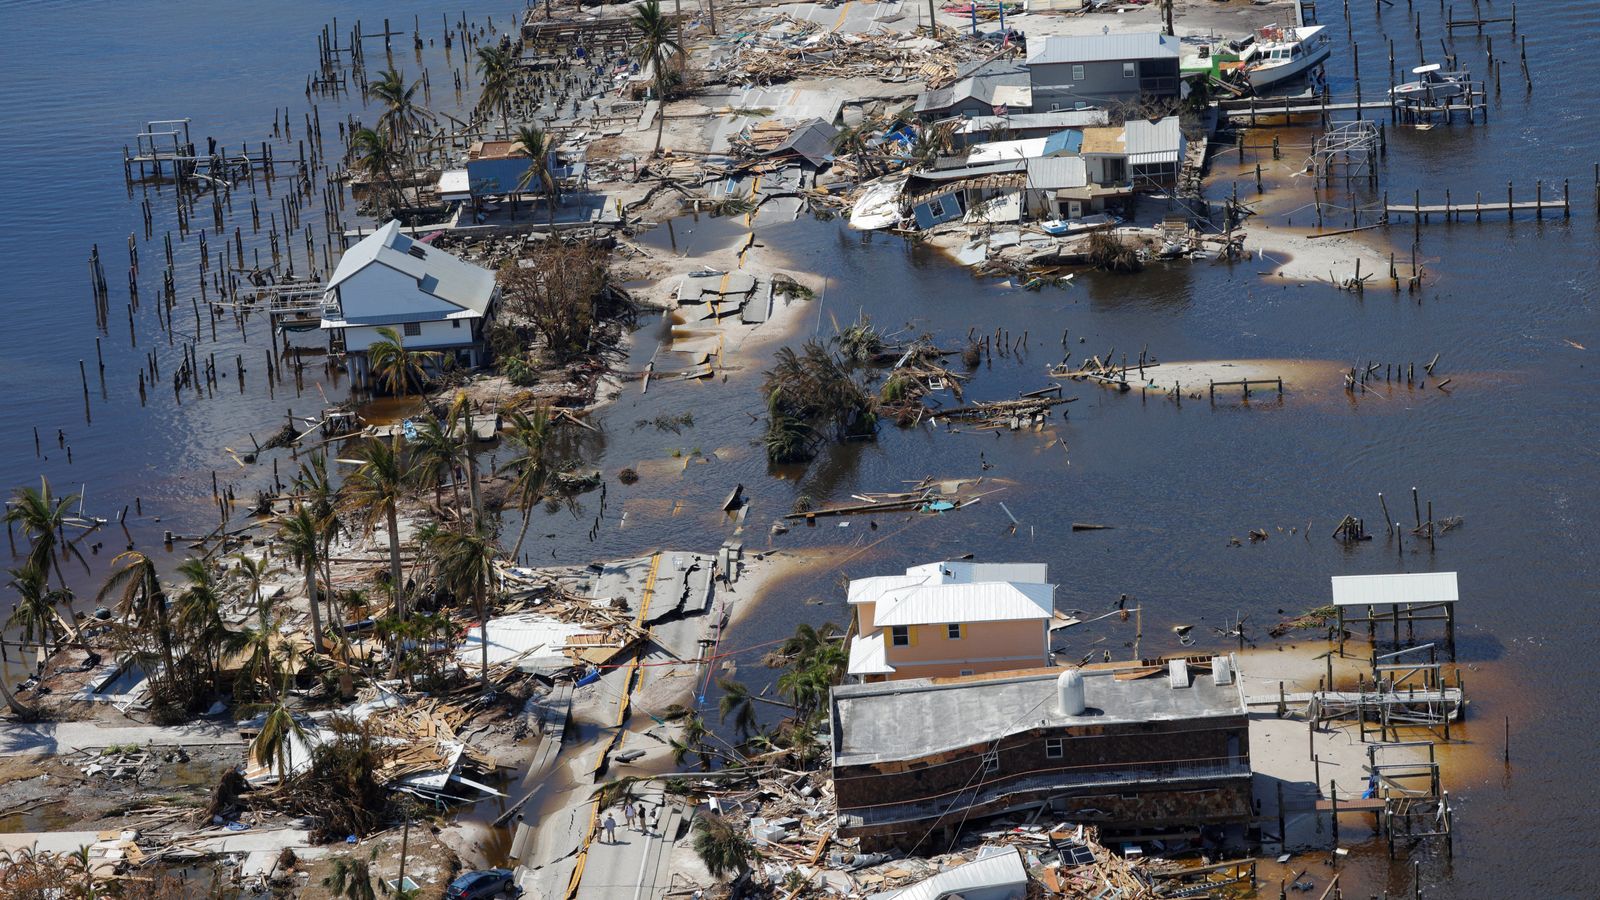 Hurricane Ian: 77 killed and many unaccounted for after one of strongest, costliest storms in US history